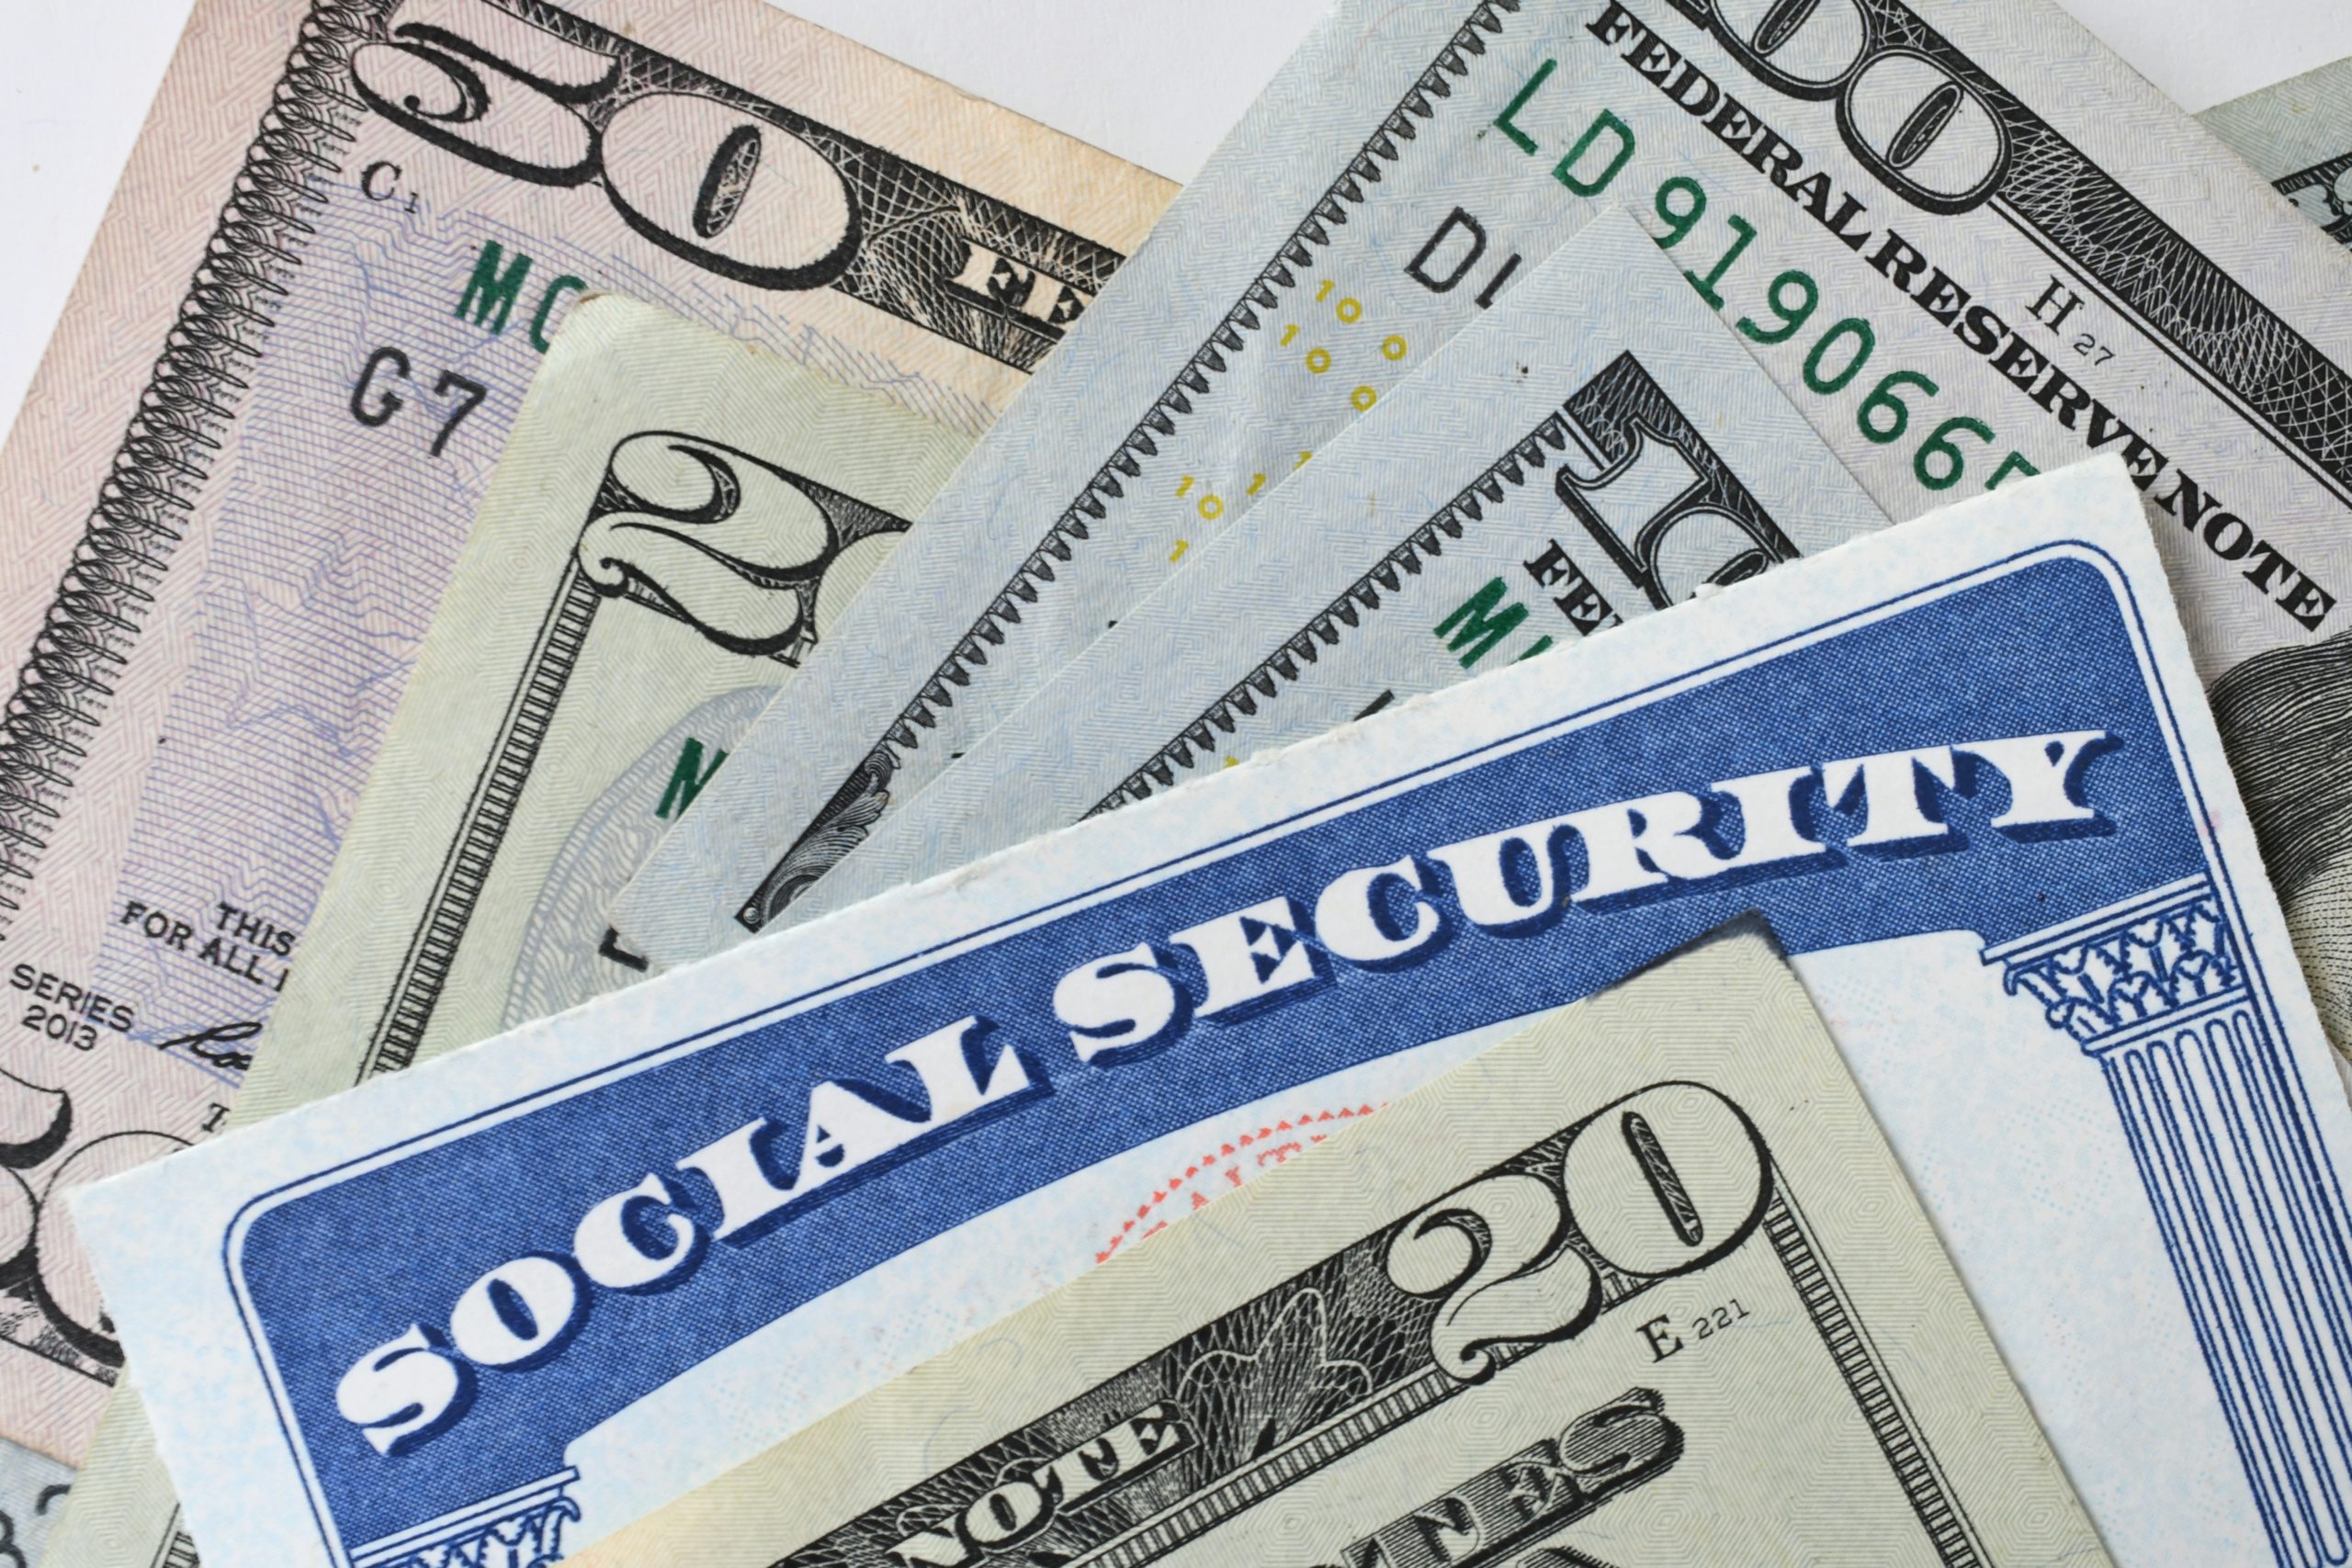 How to Review Your Online Social Security Statement